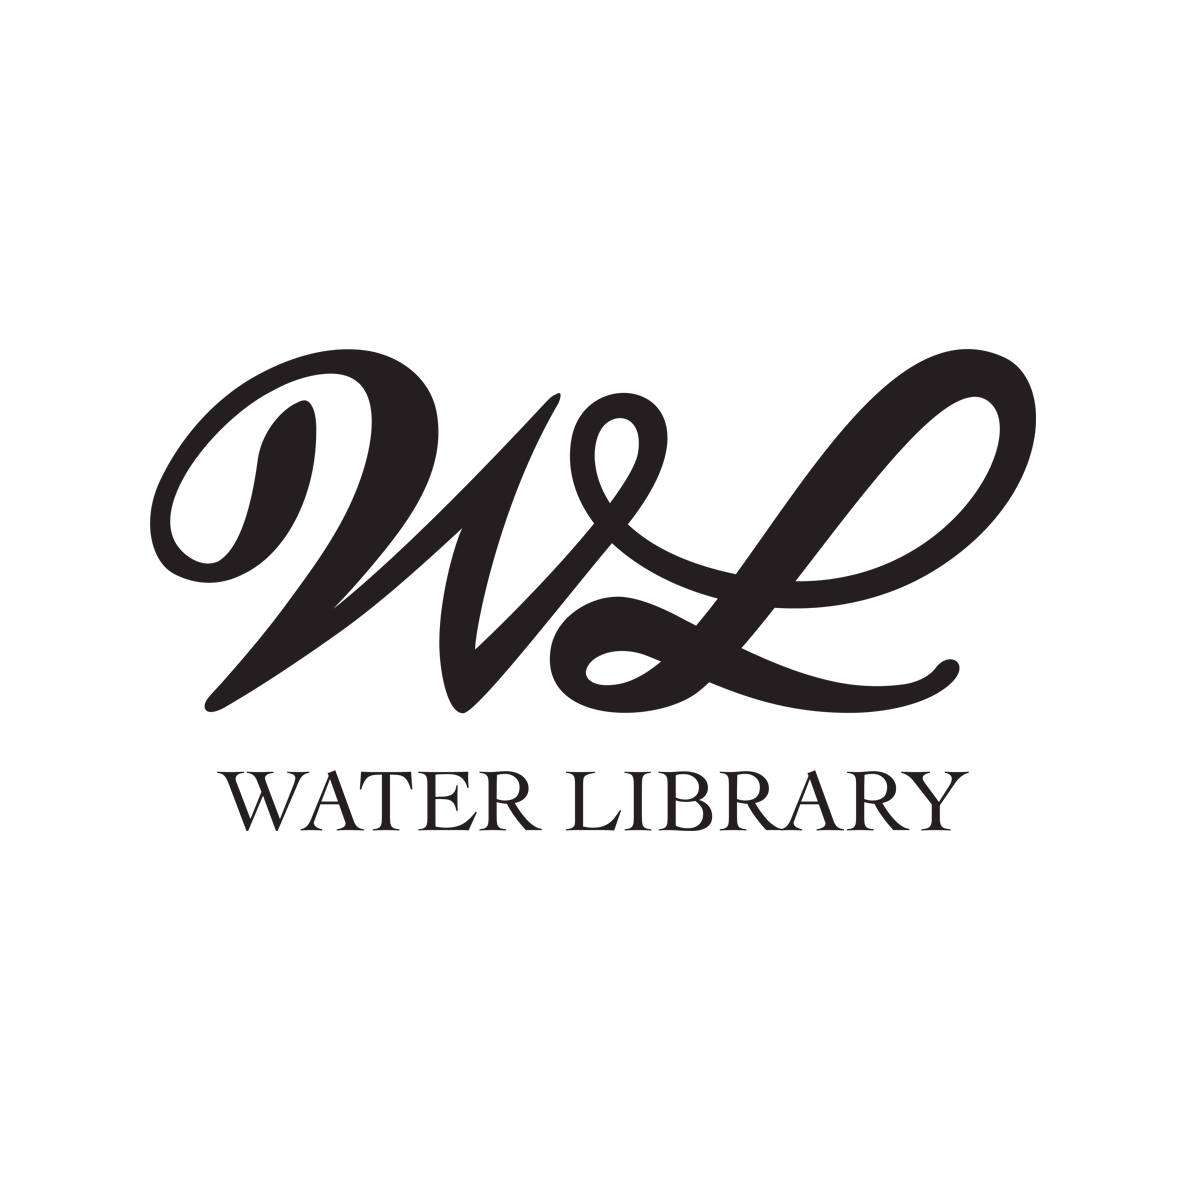 Water library